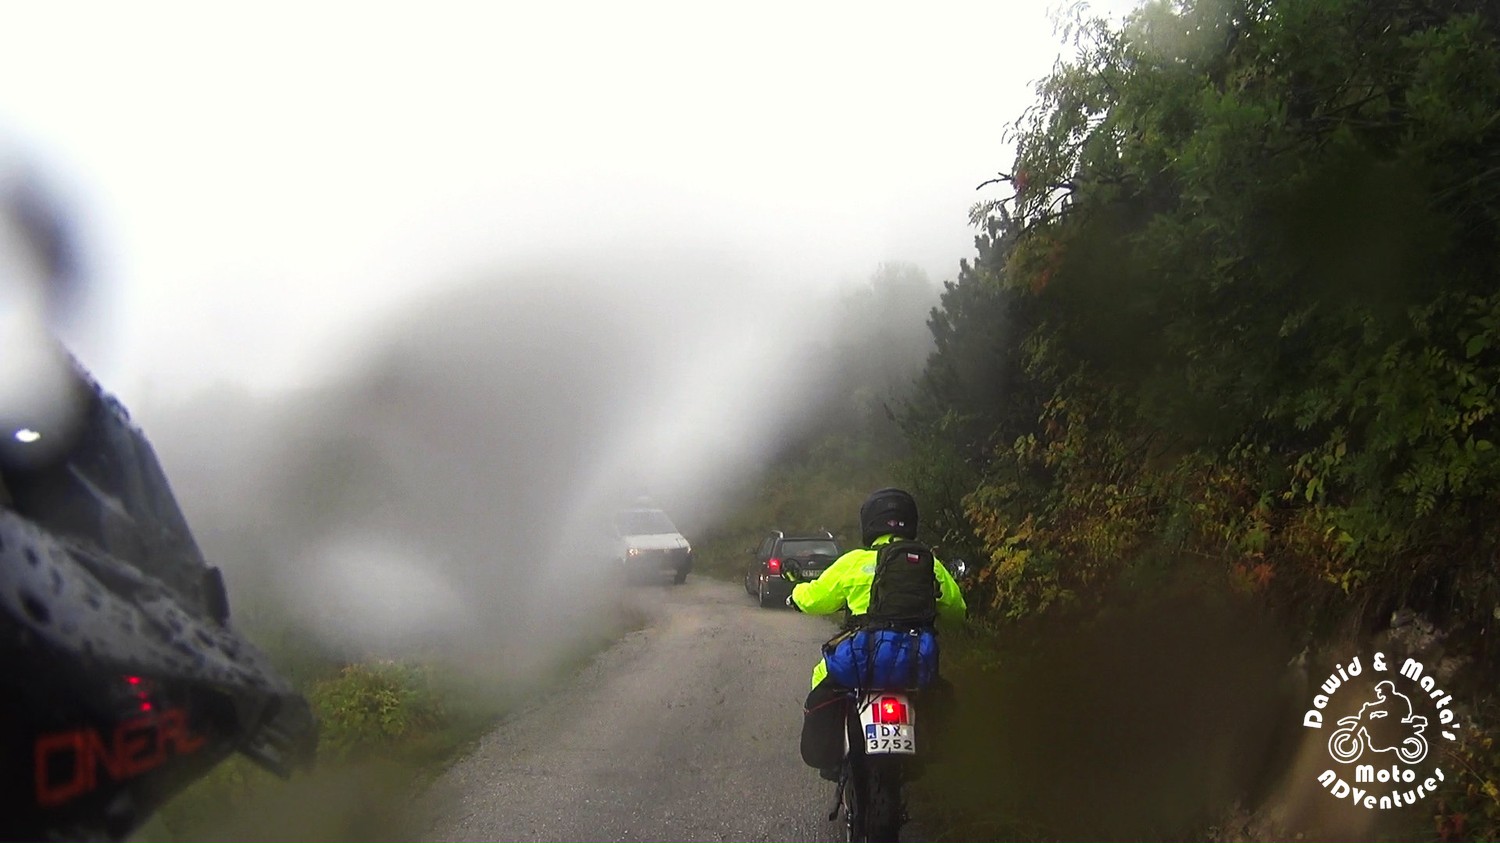 Riding down tara Canyon in the fog on the motorcycles